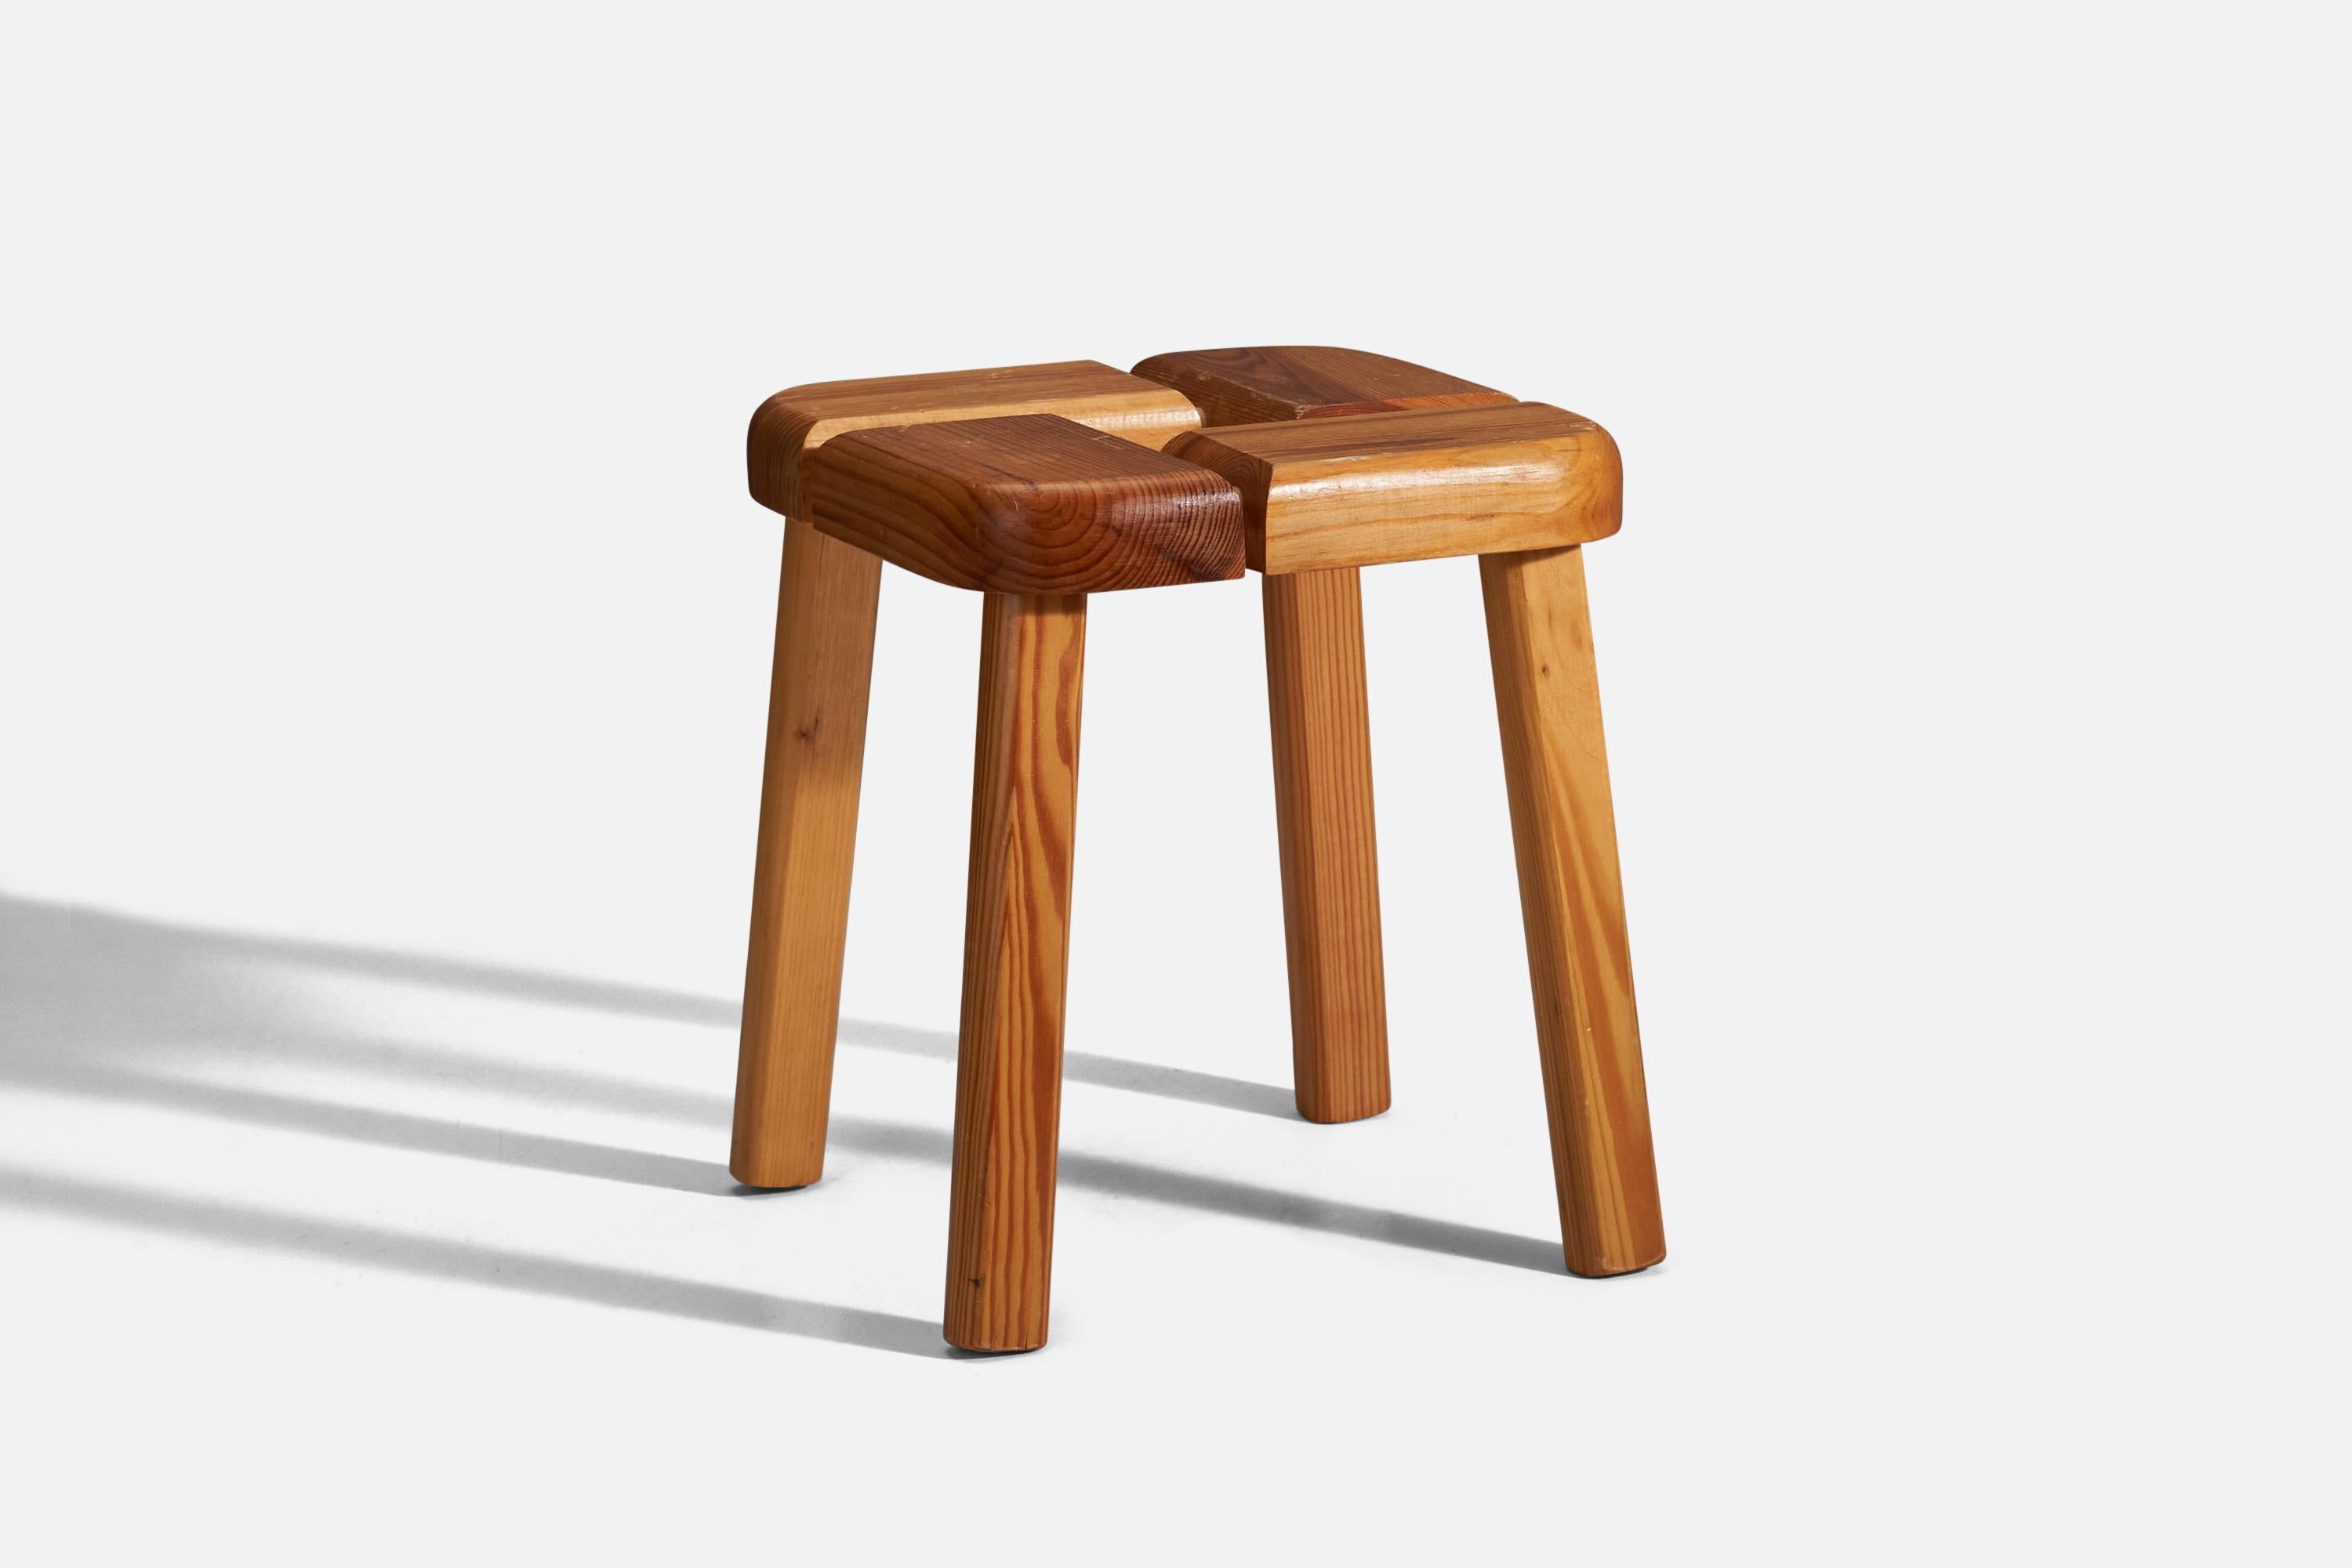 A pine stool; design and production attributed to Olof Ottelin, Finland, 1960s.